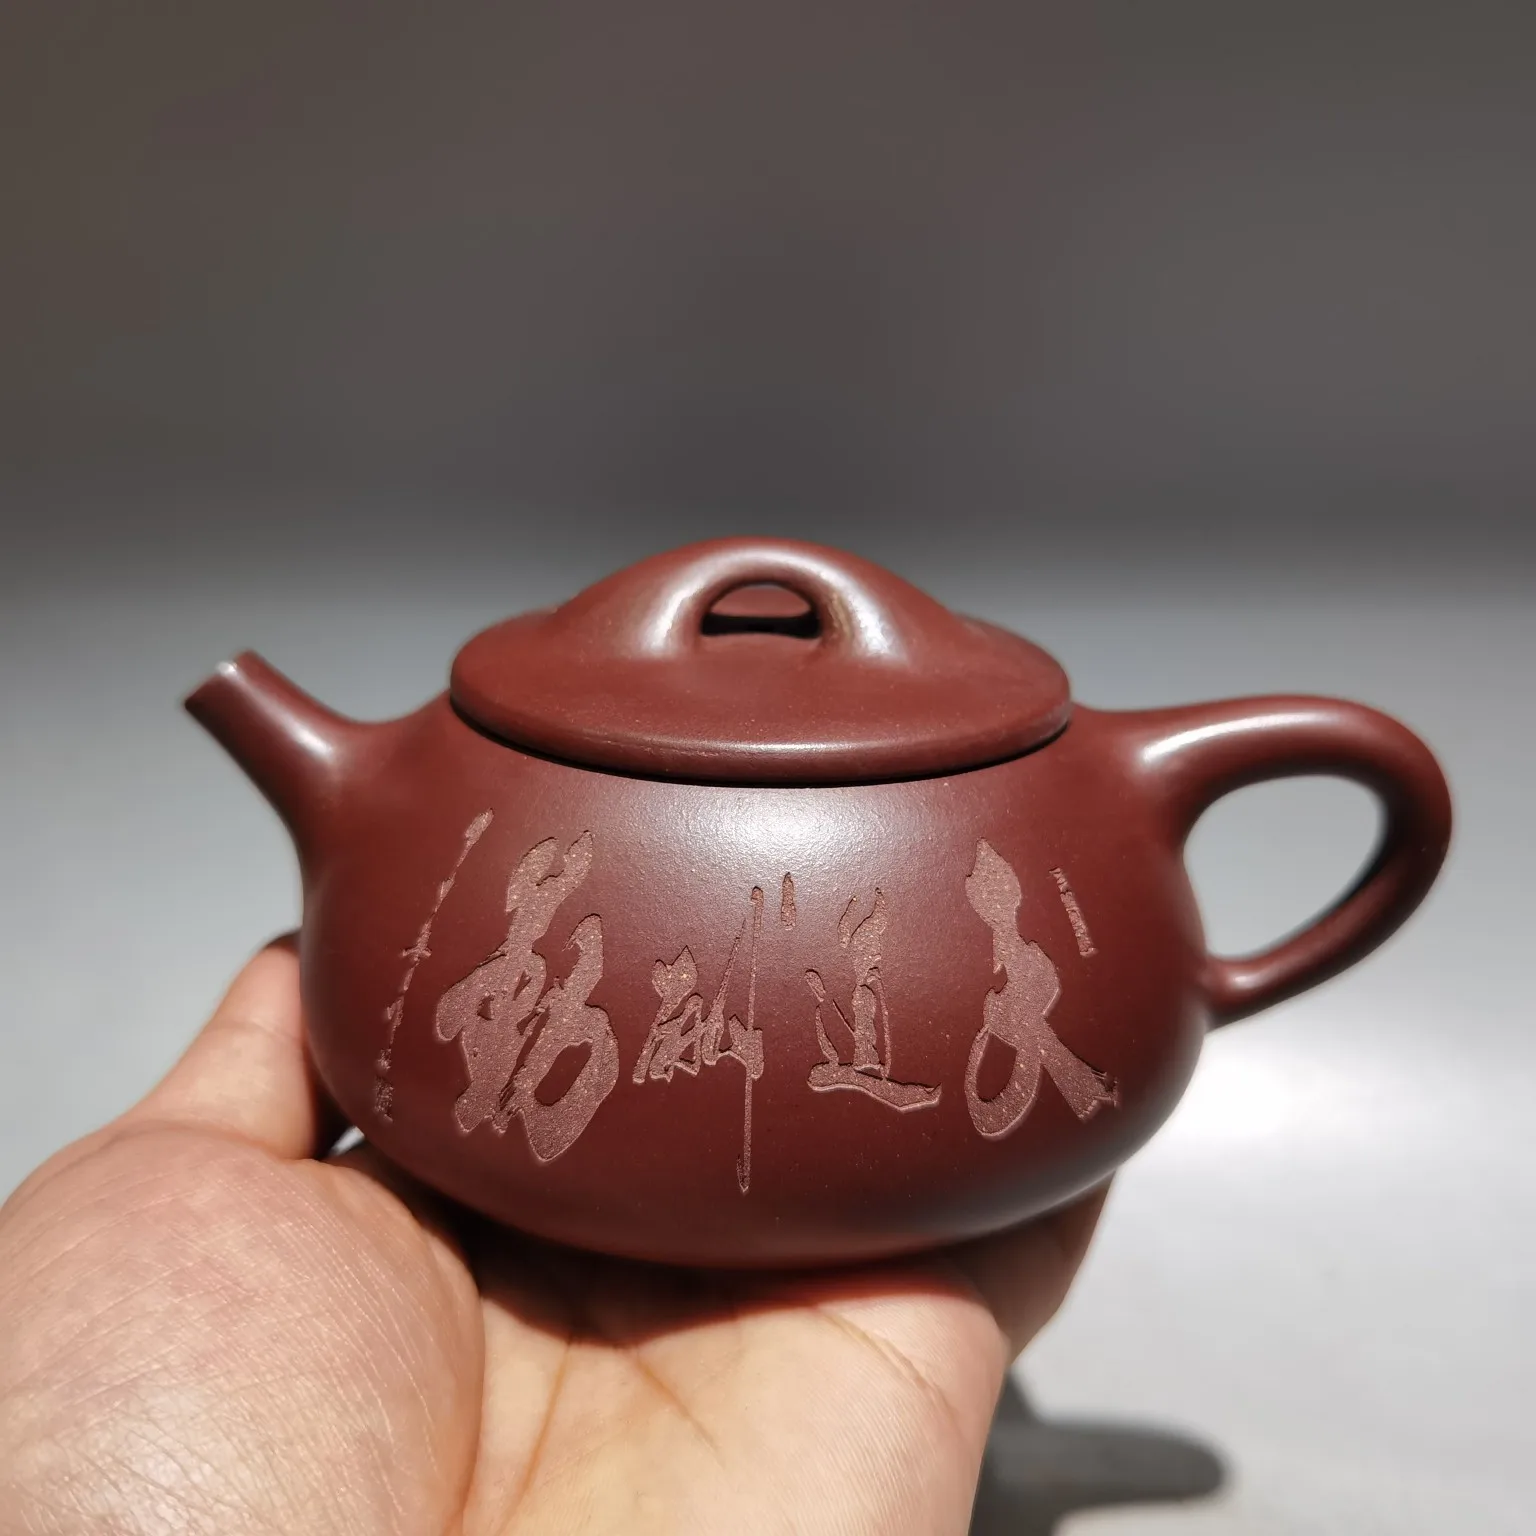 

6"Chinese Yixing Zisha Pottery God rewards diligence Lettering kettle teapot flagon red mud Gather fortune Office Ornaments